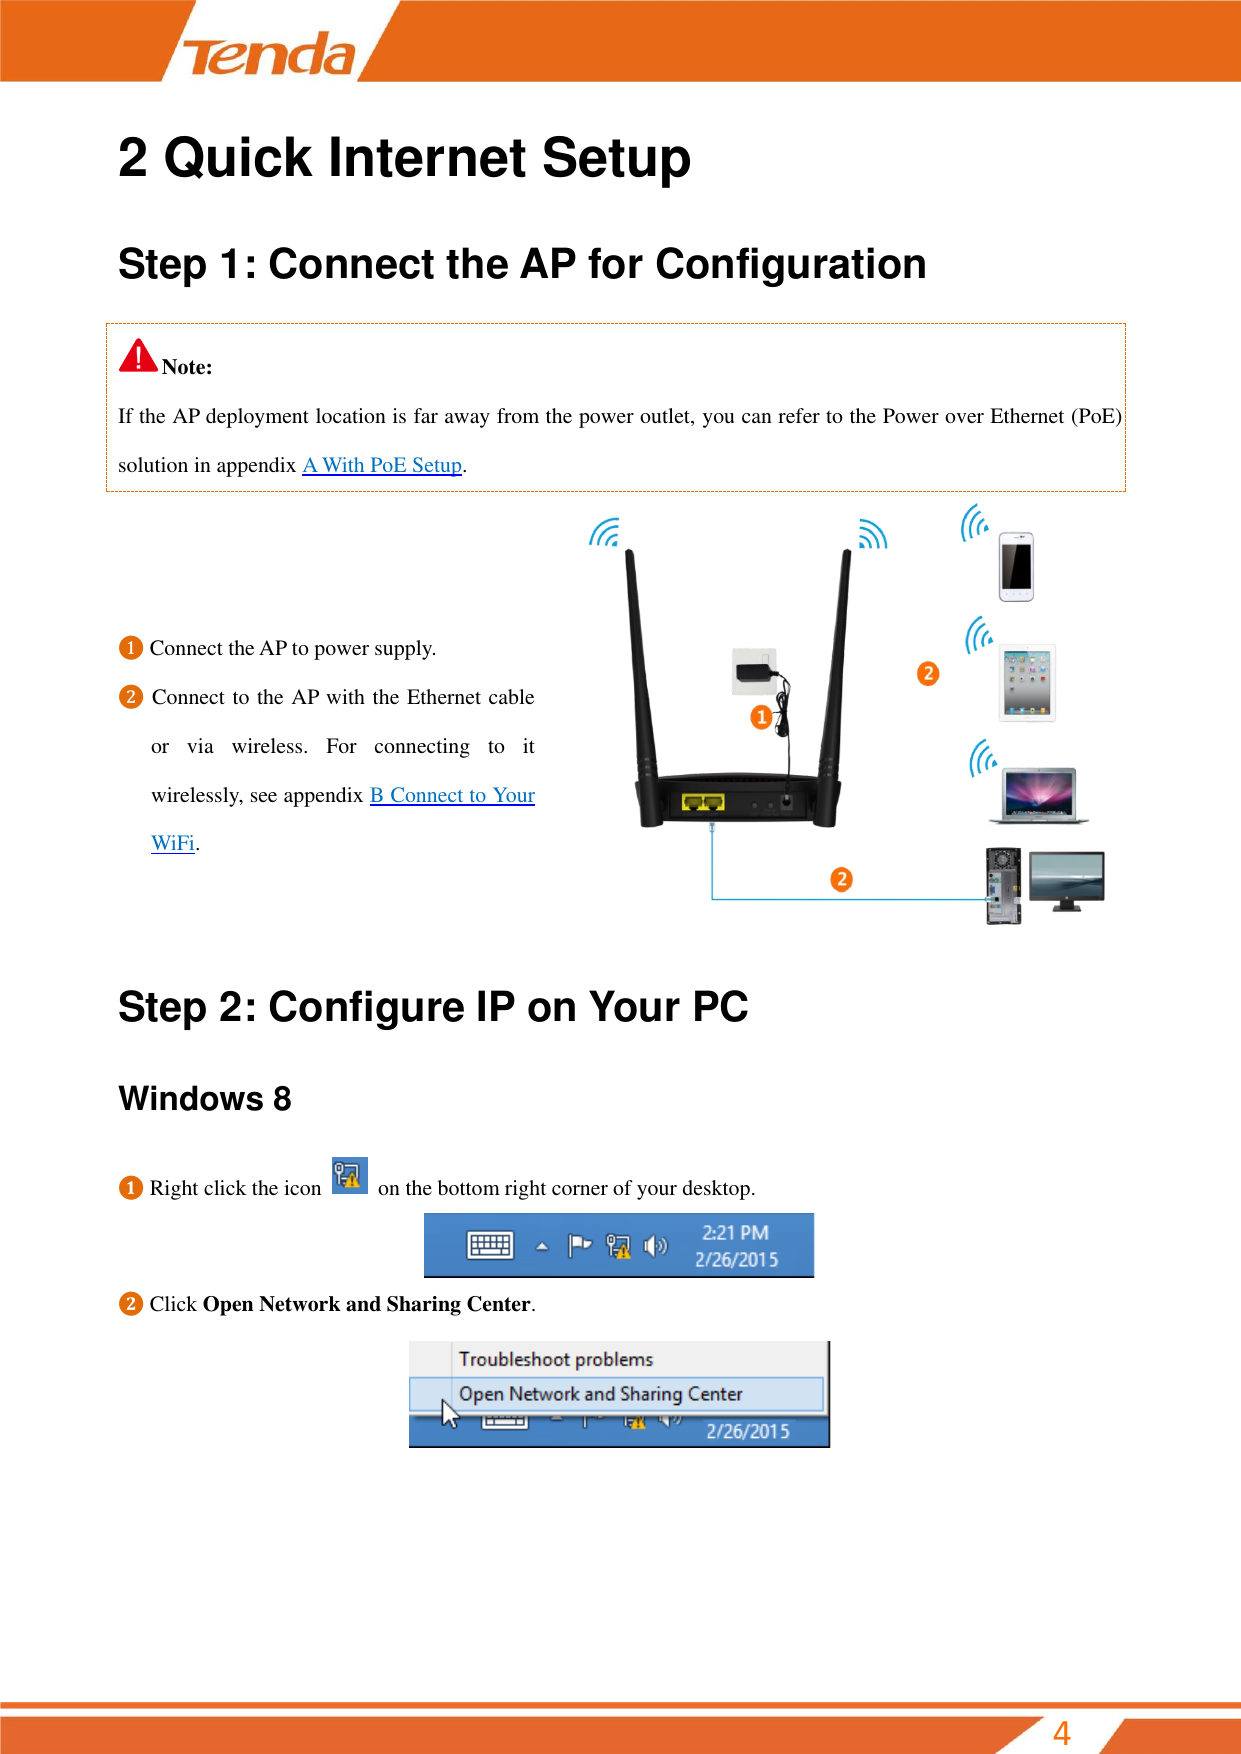         4 2 Quick Internet Setup Step 1: Connect the AP for Configuration Note: If the AP deployment location is far away from the power outlet, you can refer to the Power over Ethernet (PoE) solution in appendix A With PoE Setup.  Step 2: Configure IP on Your PC Windows 8 ❶ Right click the icon    on the bottom right corner of your desktop.  ❷ Click Open Network and Sharing Center.        ❶ Connect the AP to power supply. ❷ Connect to the AP with the Ethernet cable or  via  wireless.  For  connecting  to  it wirelessly, see appendix B Connect to Your WiFi. 